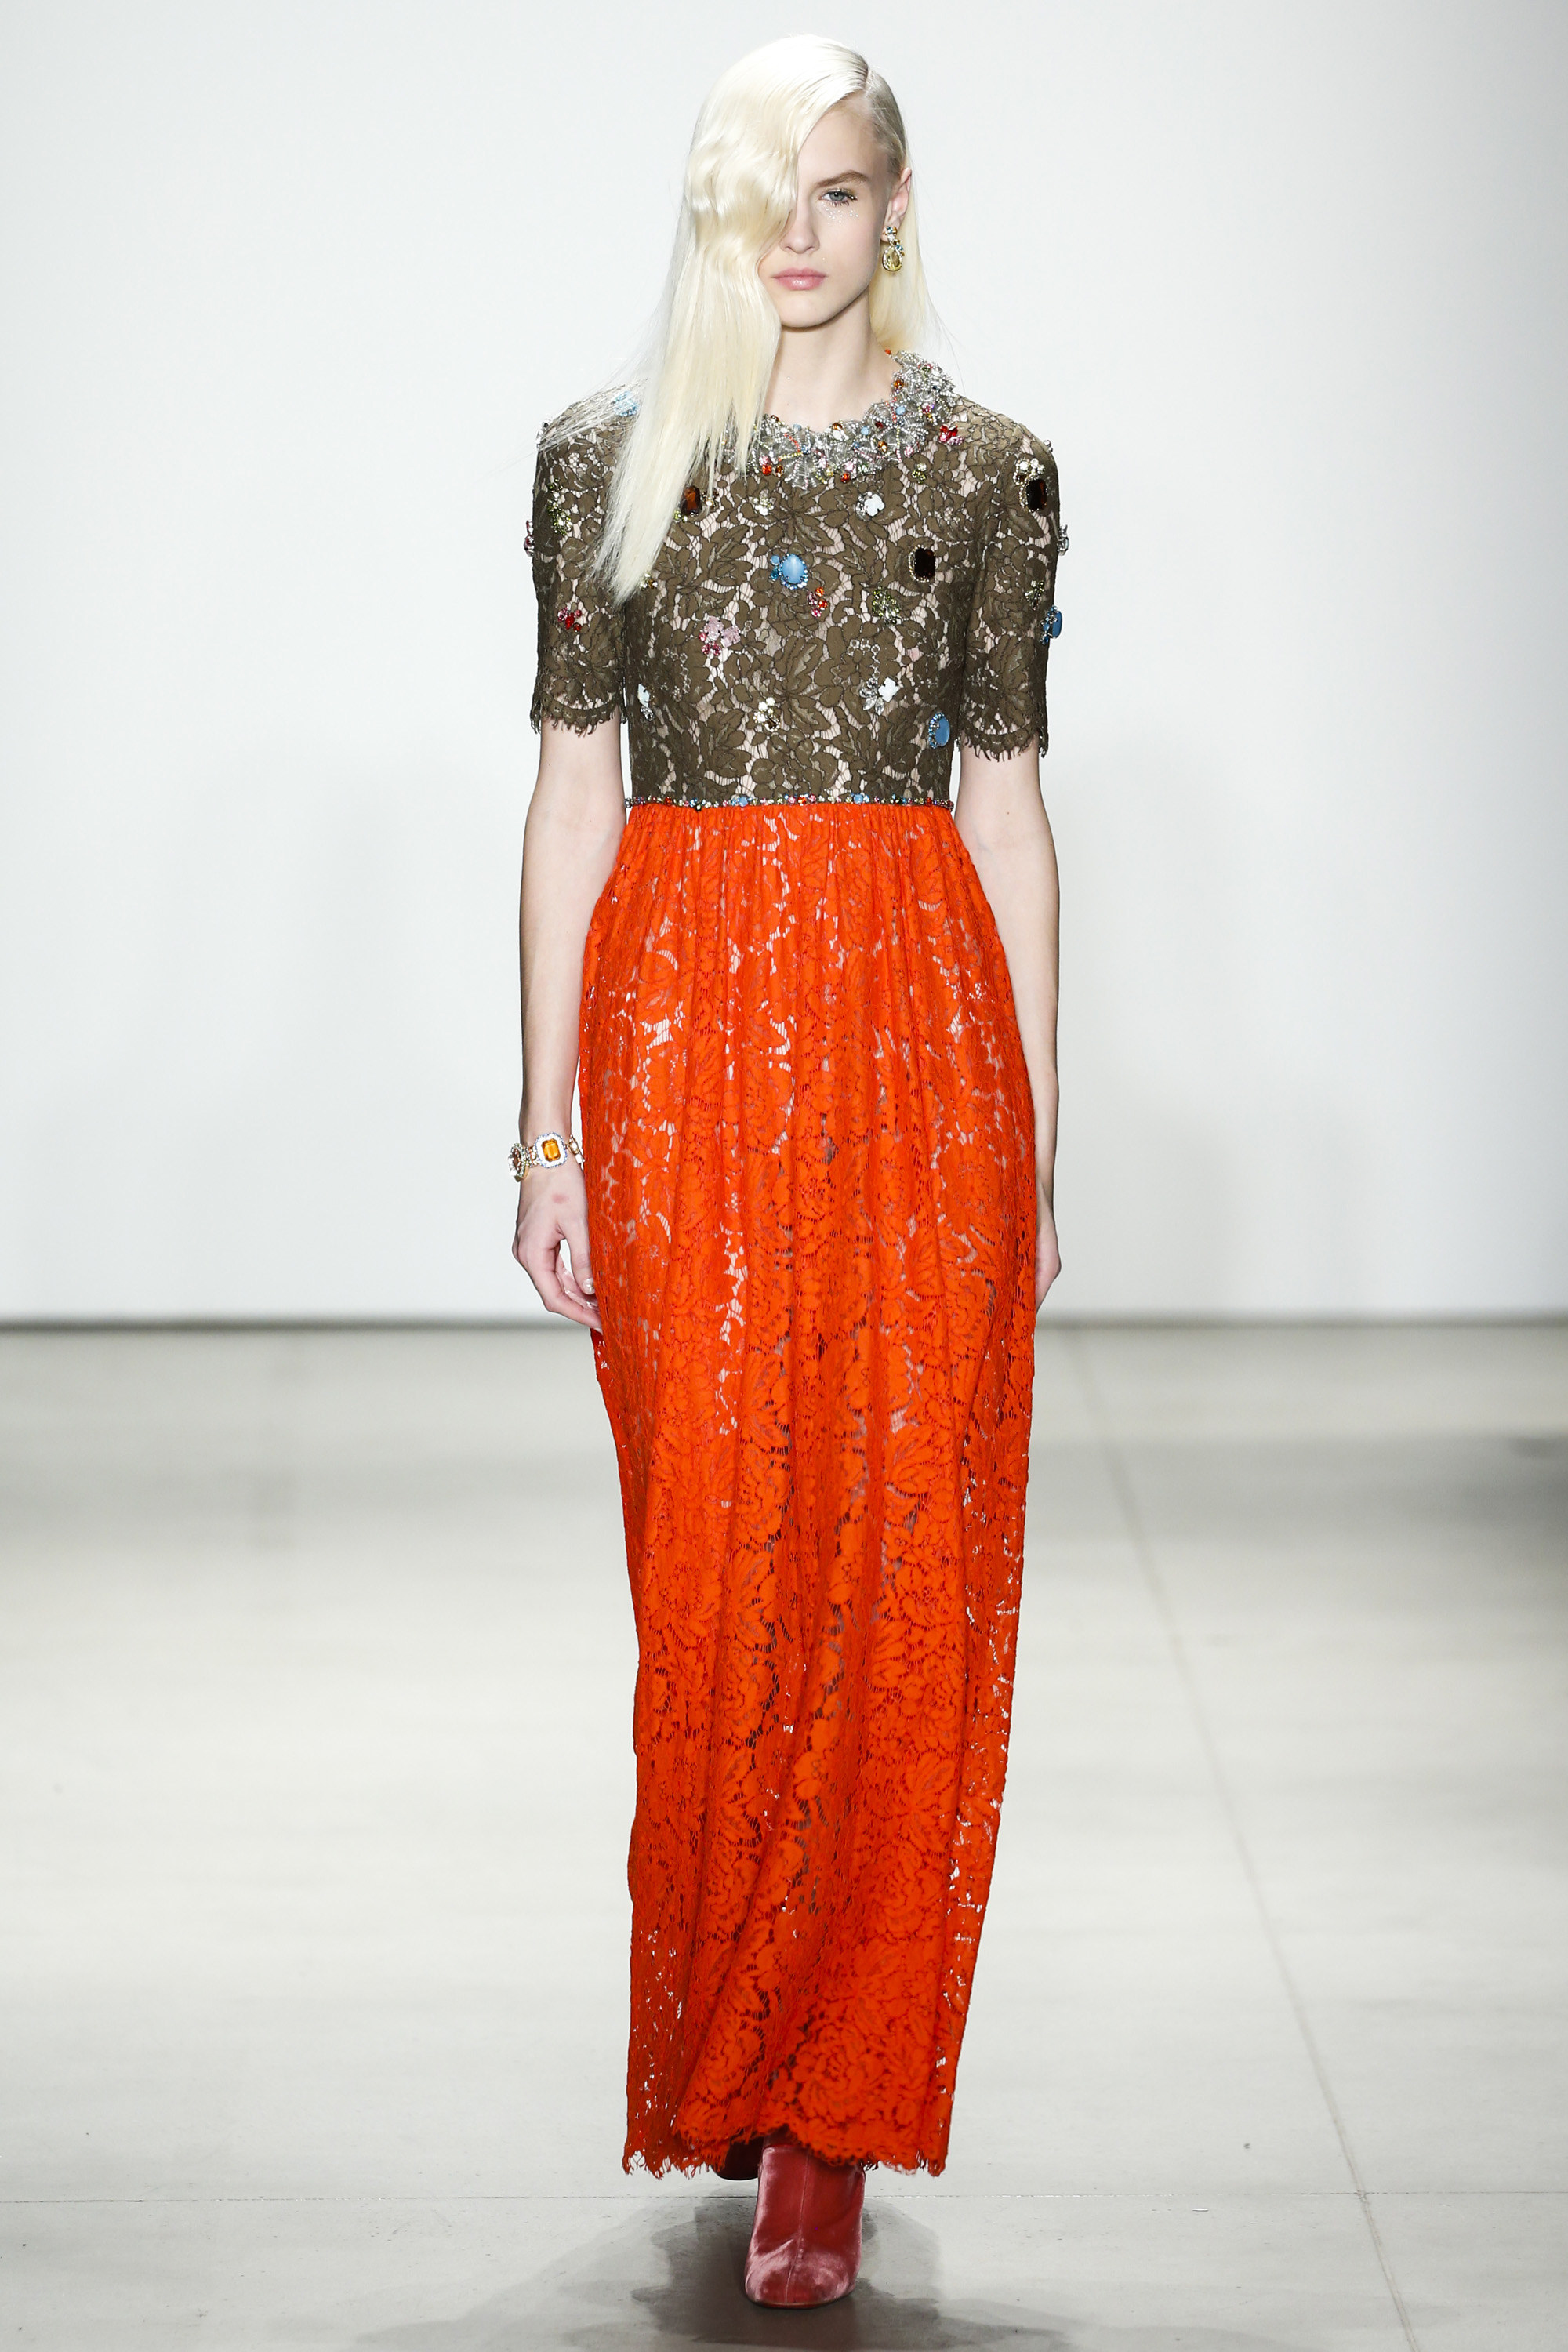 NYFW Jenny Packham Fashion Show Fall:Winter 2016 Louboutins & Love Fashion Blog Esther Santer NYC Street Style Models Collection Hair Makeup Dress Sequins Trend Gown Metallic Gold Beautiful Pretty Pink Color Red Yellow Floral Sheer Front Slit Skirt.jpg